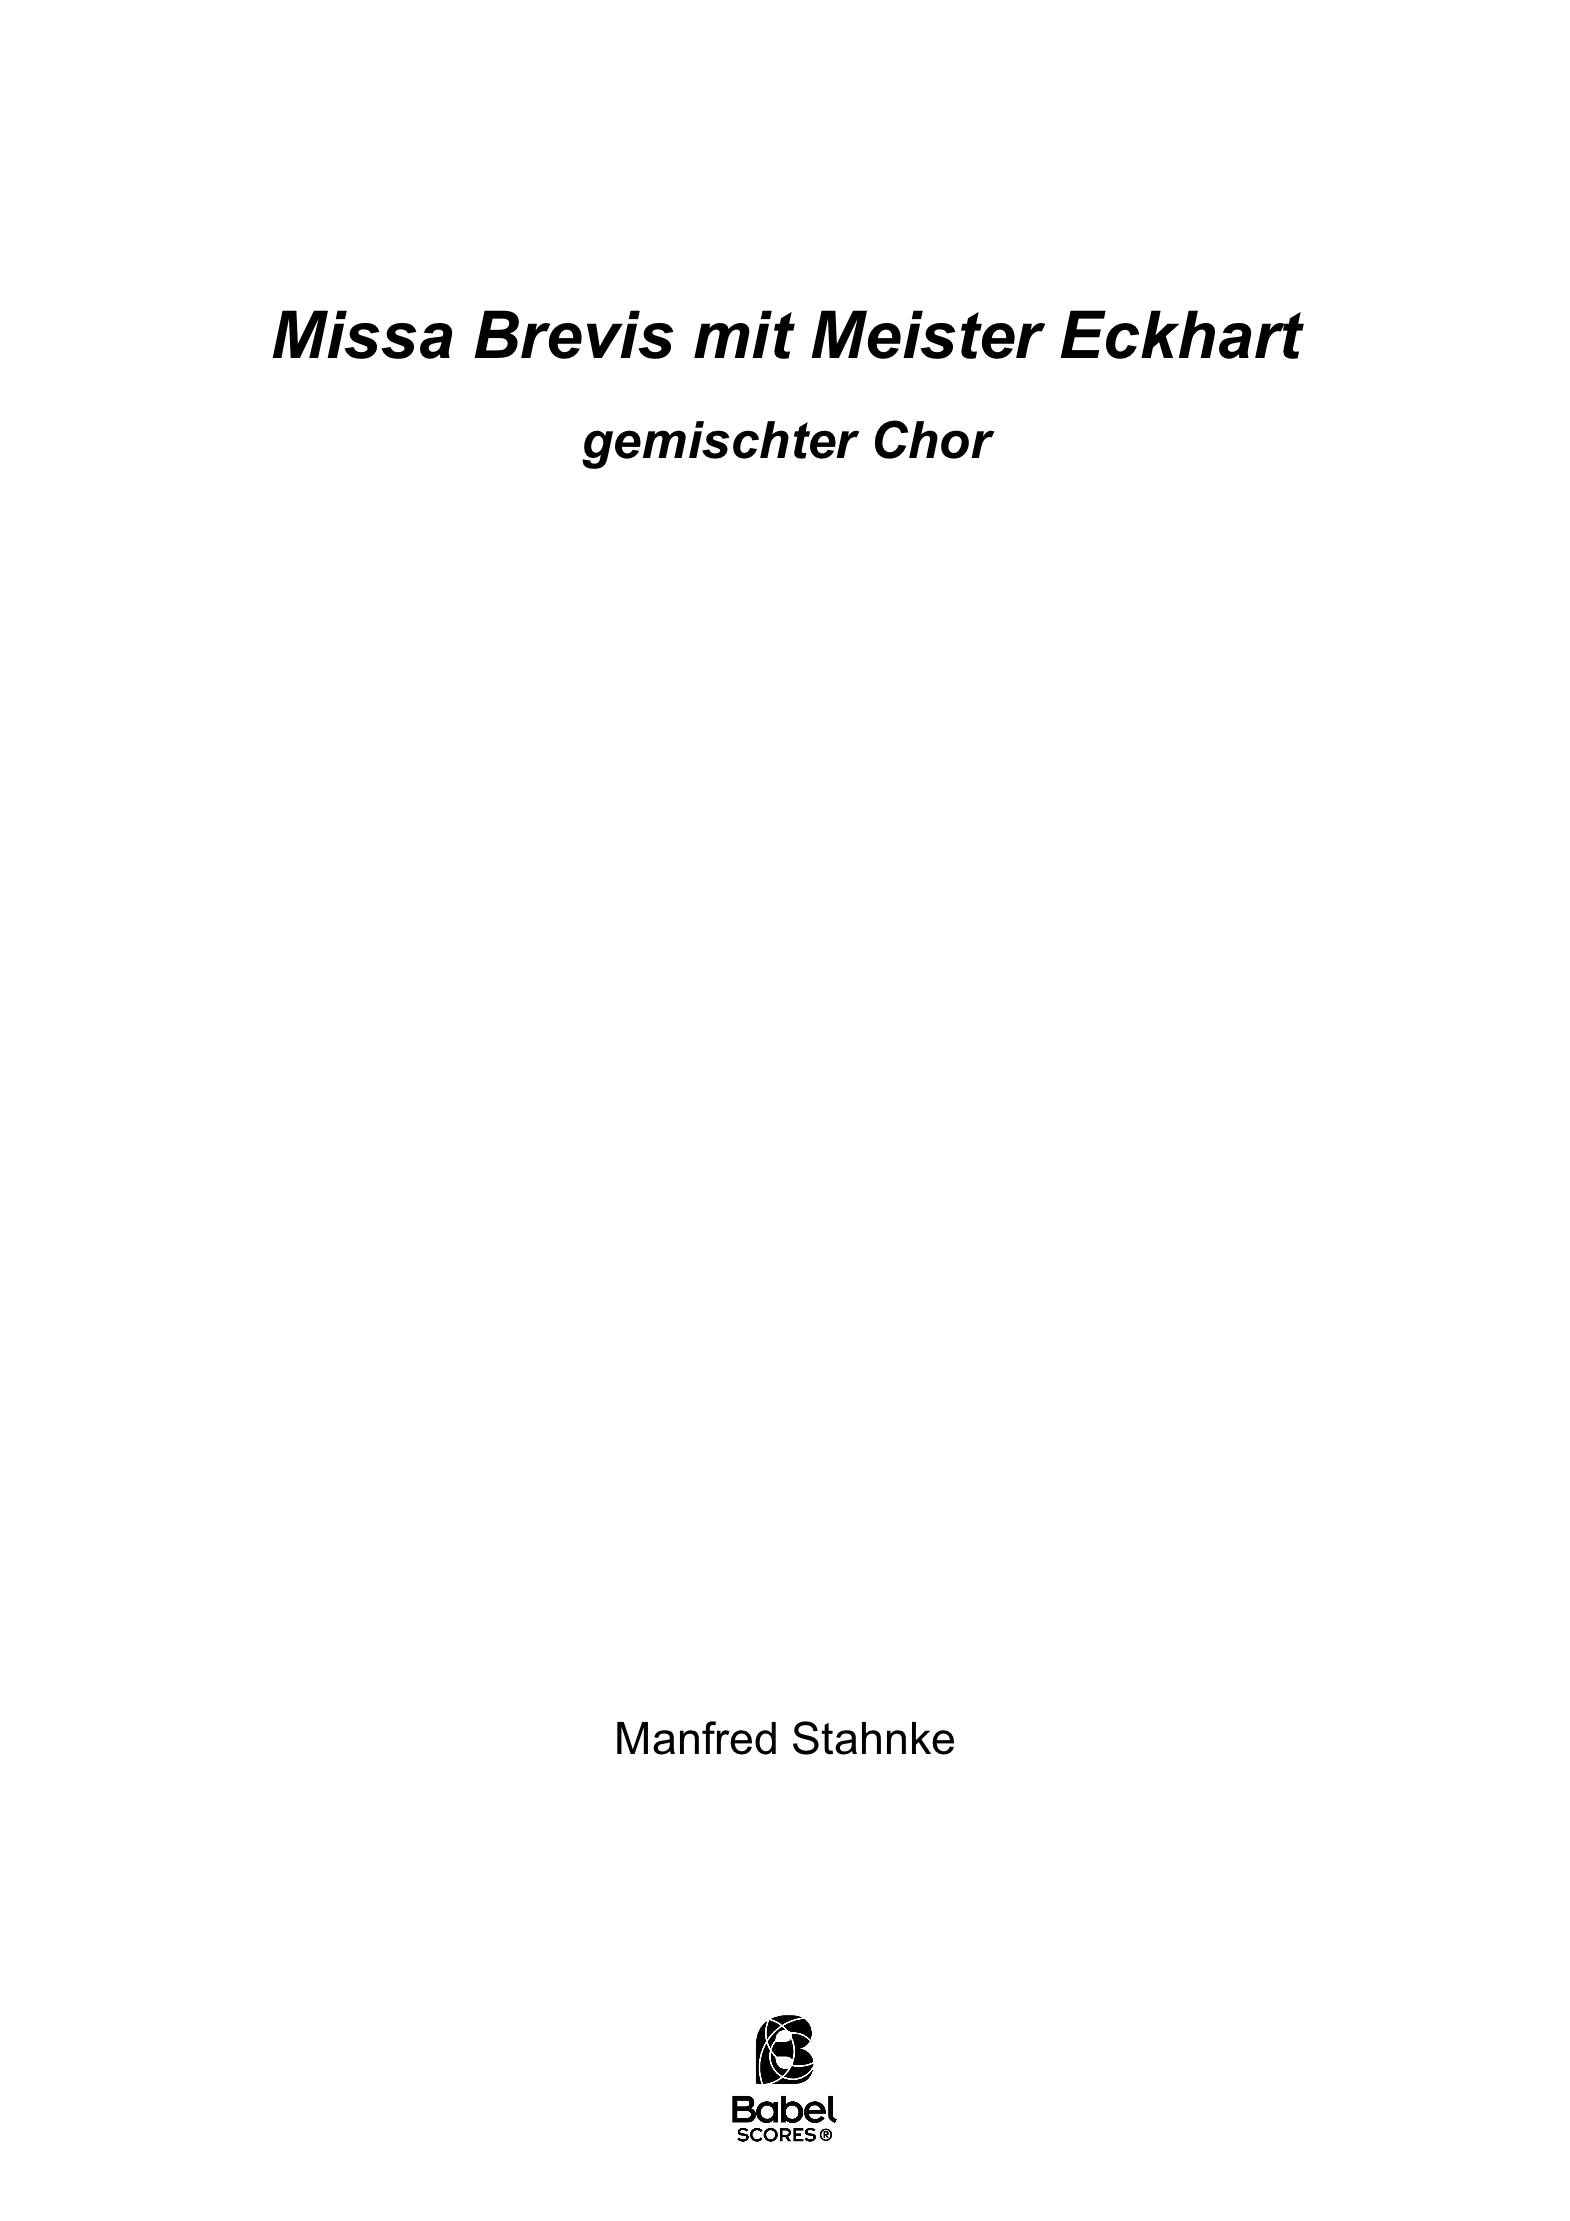 missa brevis with meister eckhart A4 z 2 262 1 911